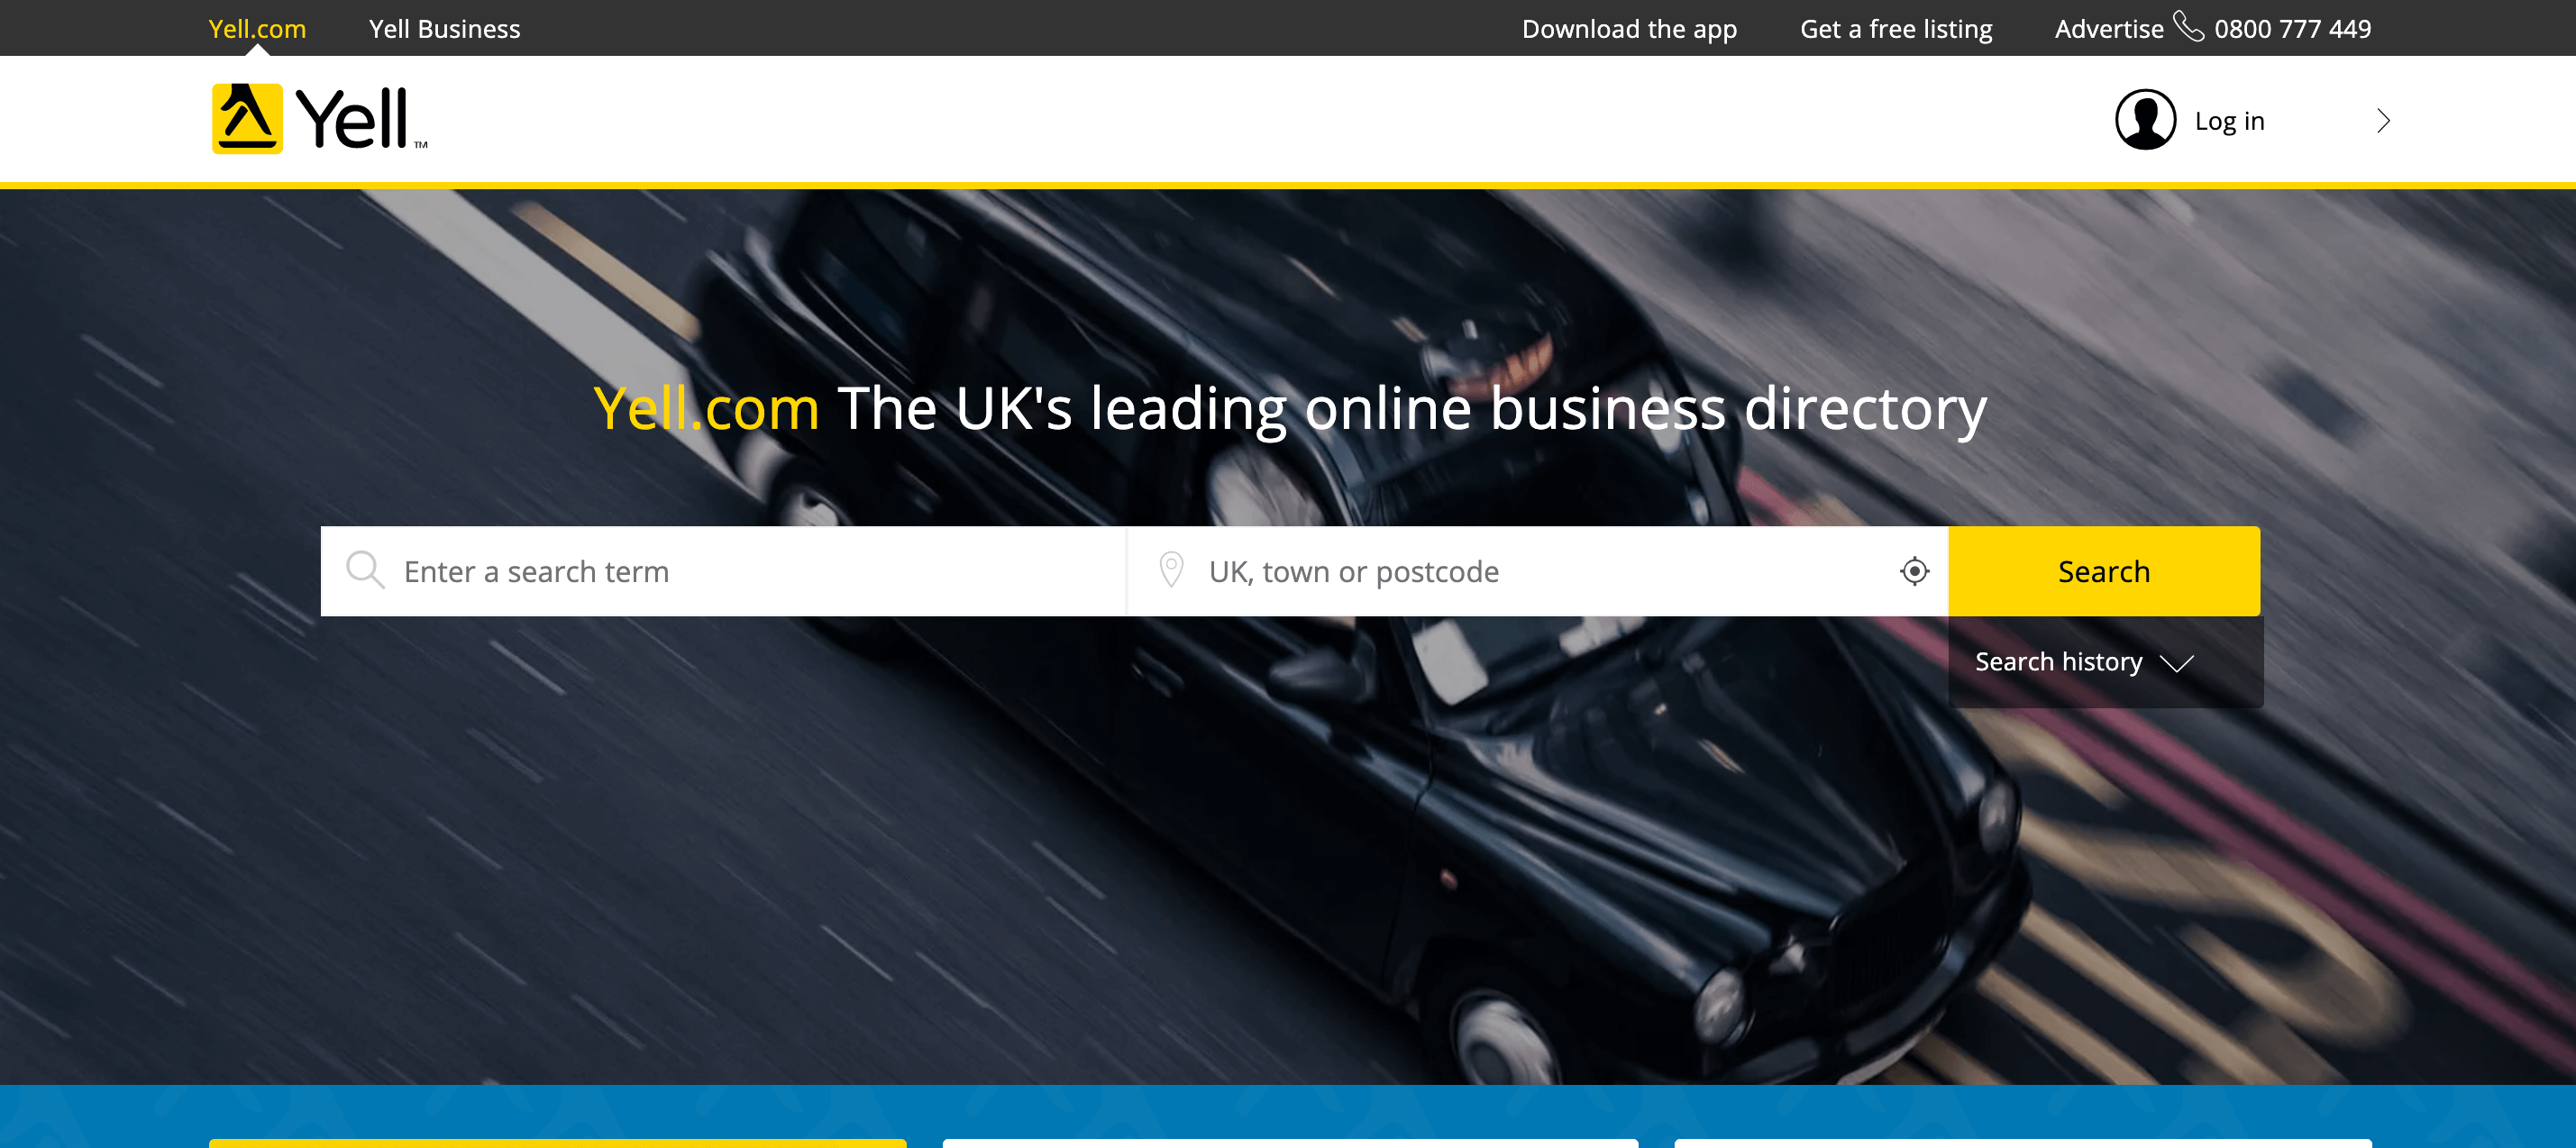 yell - free UK business directories